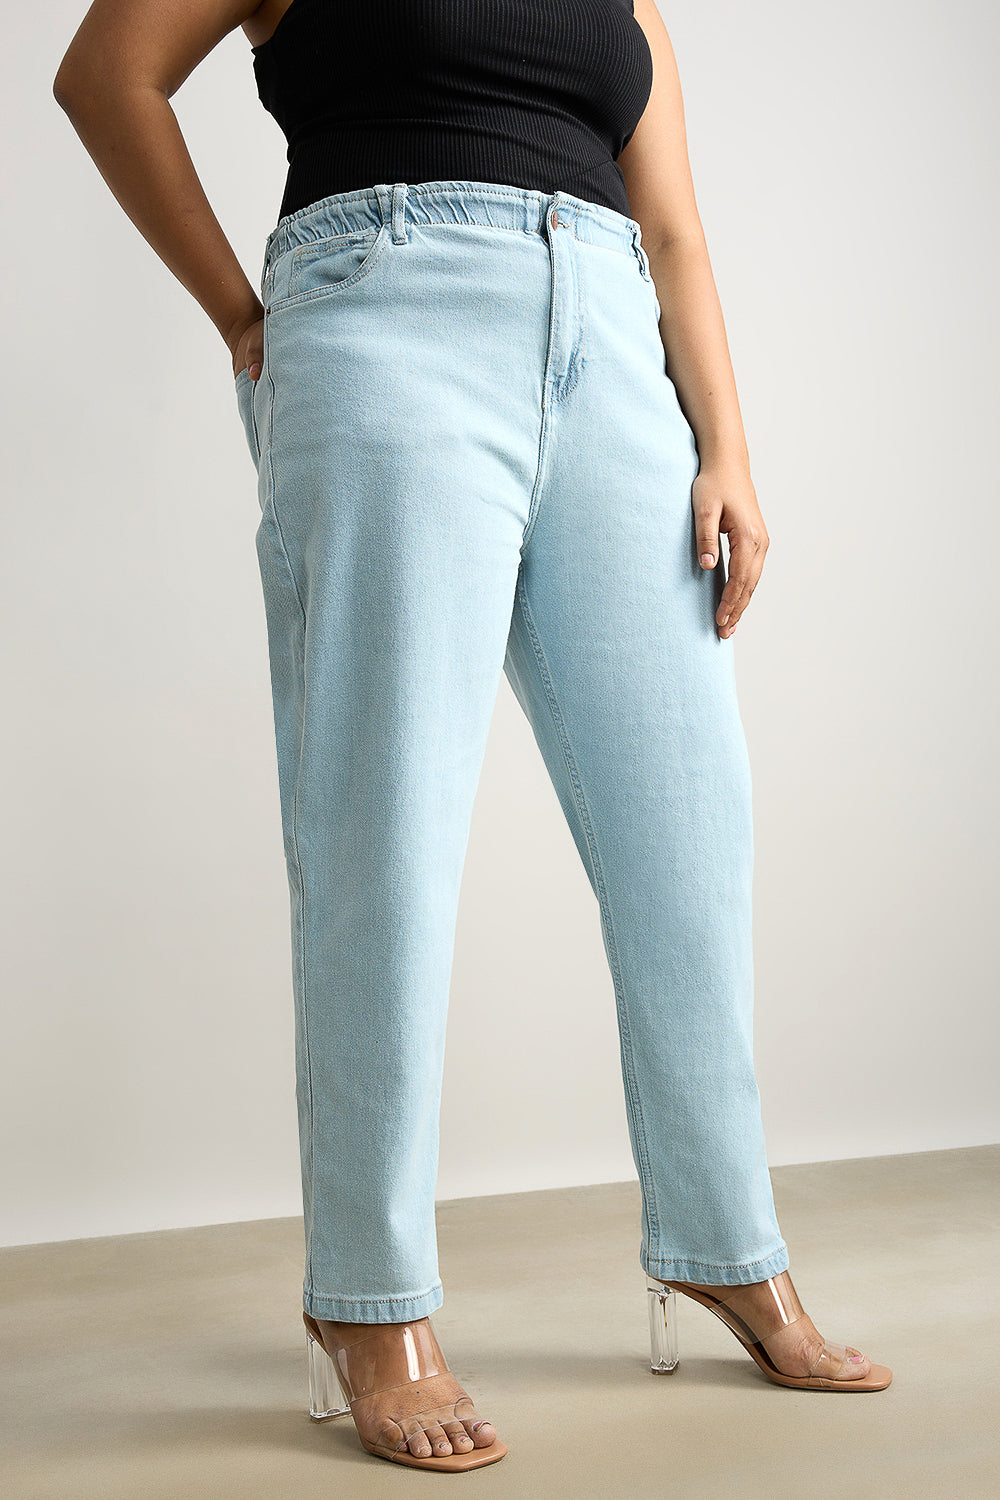 STRETCHY LIGHT WASH MOM JEANS